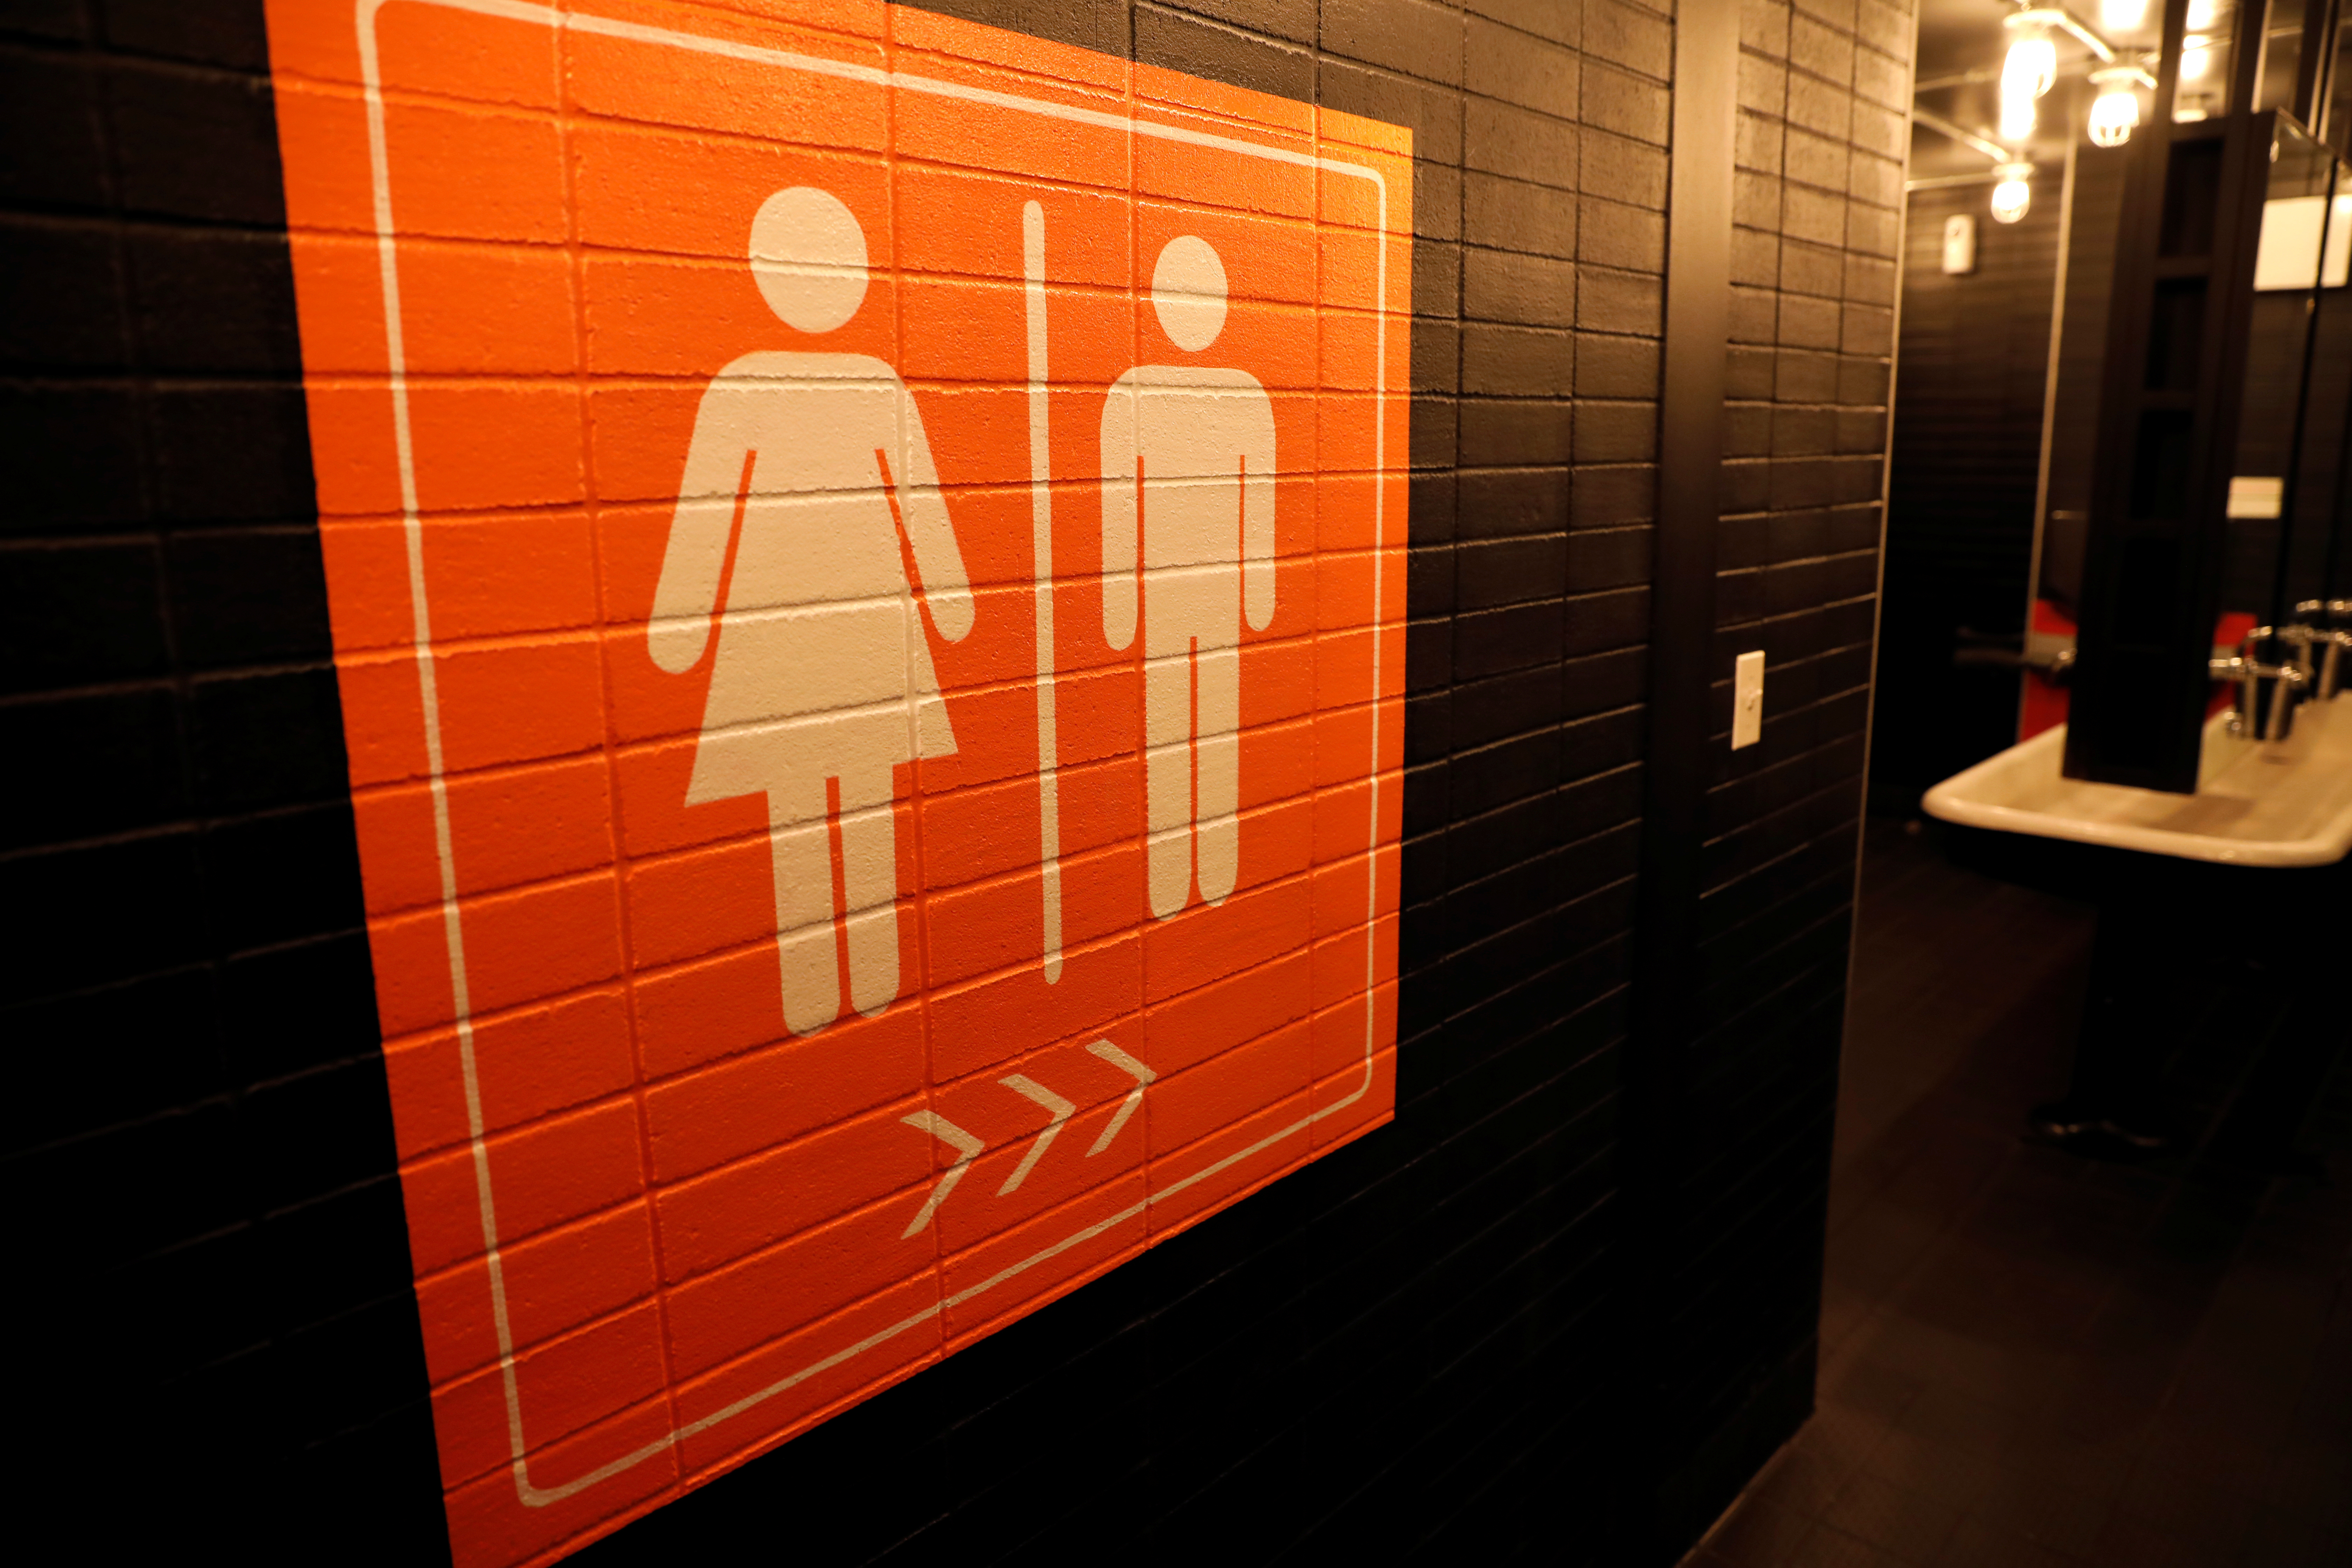 A sign is seen pointing to a gender neutral restroom in New York City